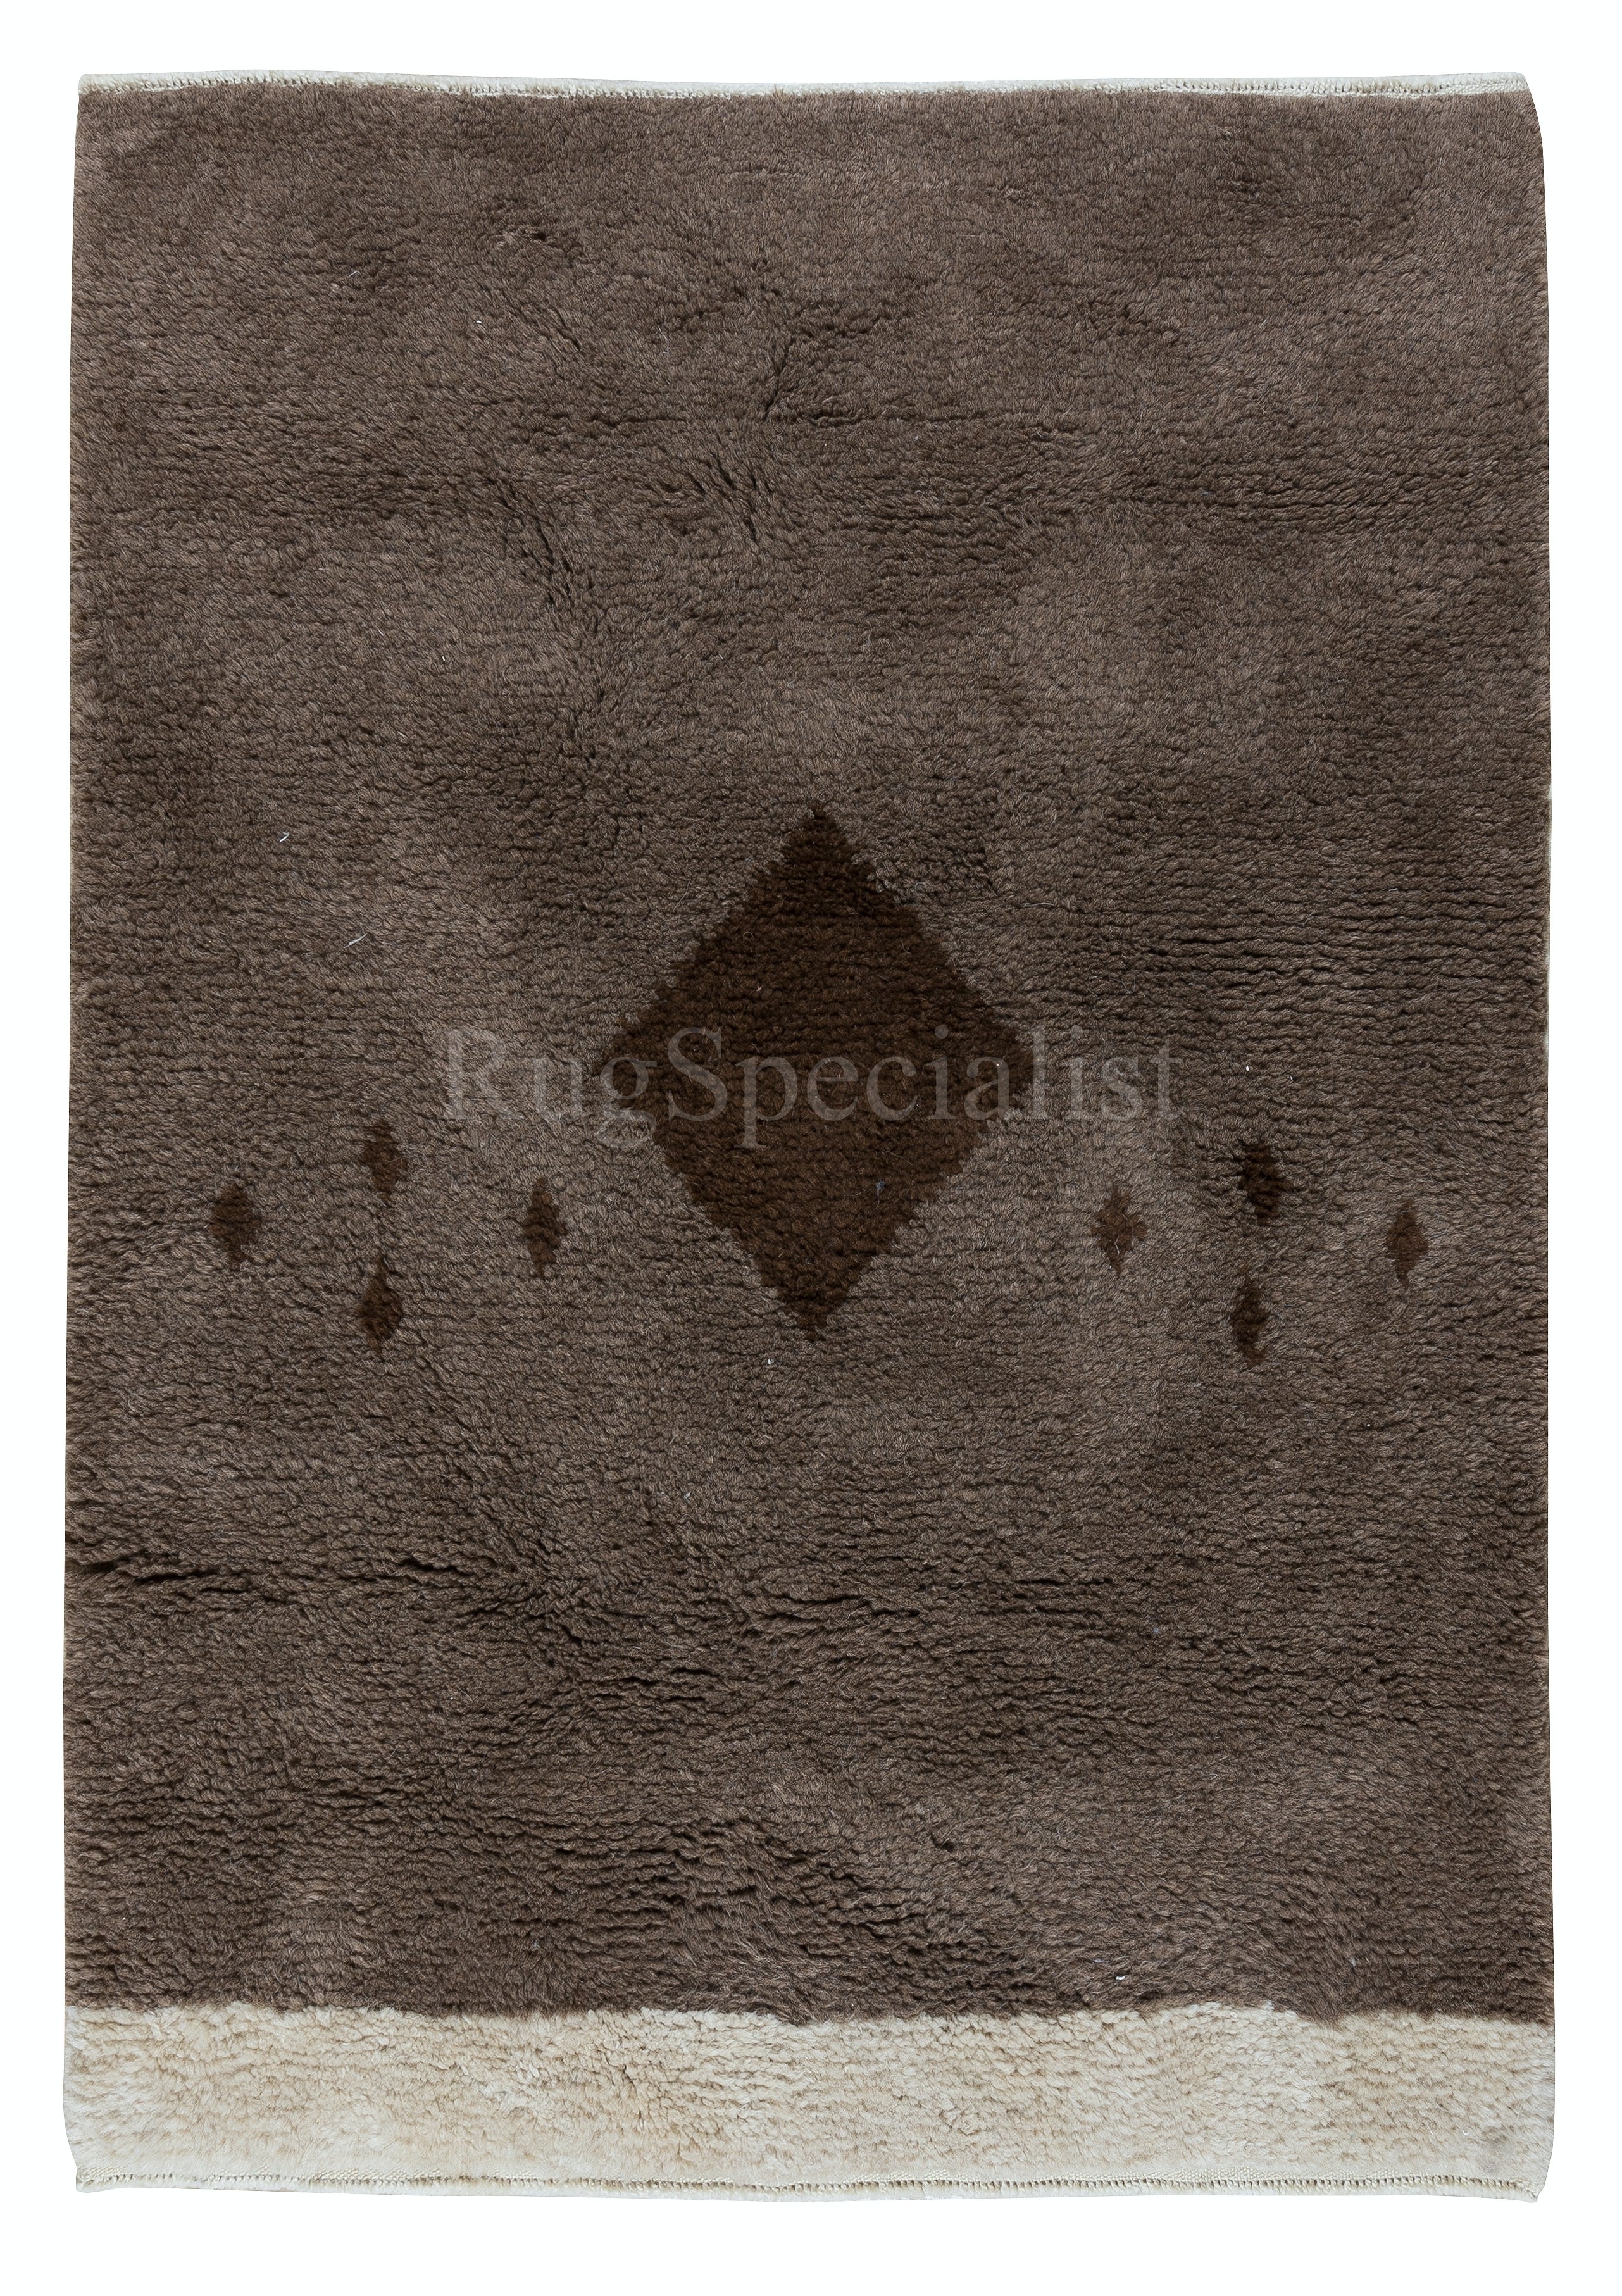 4x6 ft Hand Knotted "Tulu" Rug in Brown and Beige, 100% Natural Un-Dyed Wool For Sale